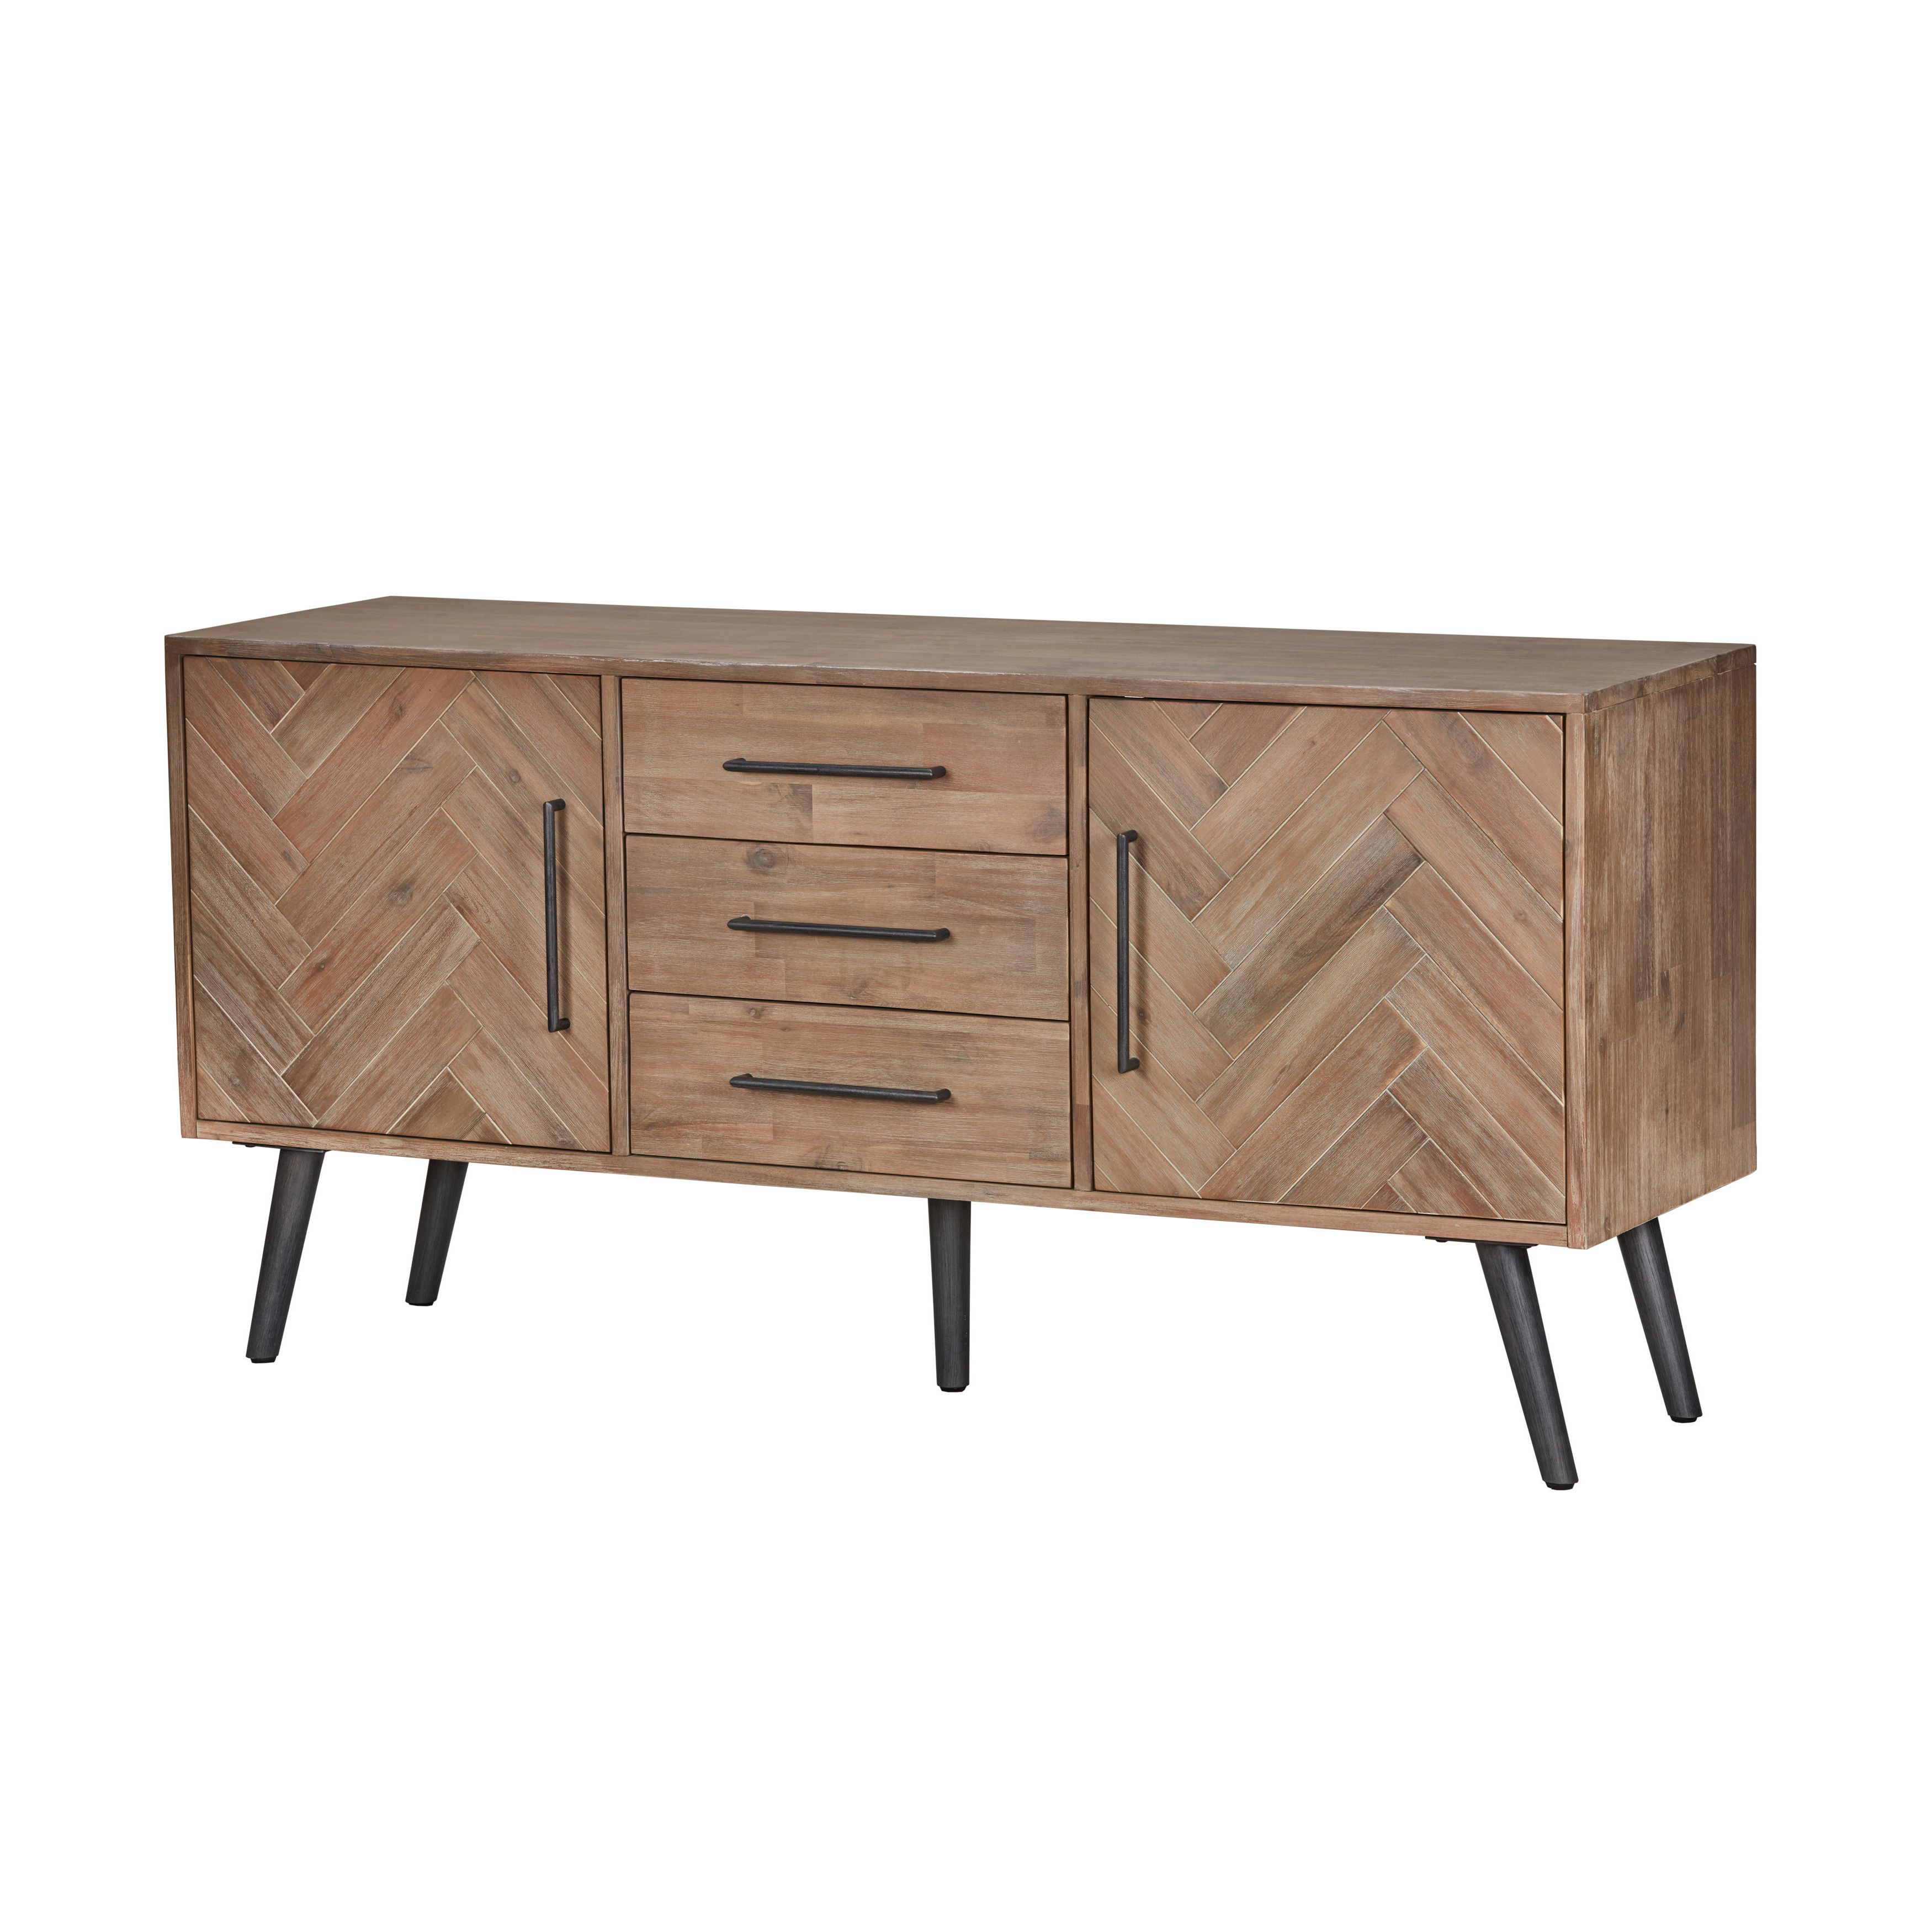 Distressed Finish Sideboards & Buffets | Joss & Main Pertaining To Giulia 3 Drawer Credenzas (View 15 of 20)